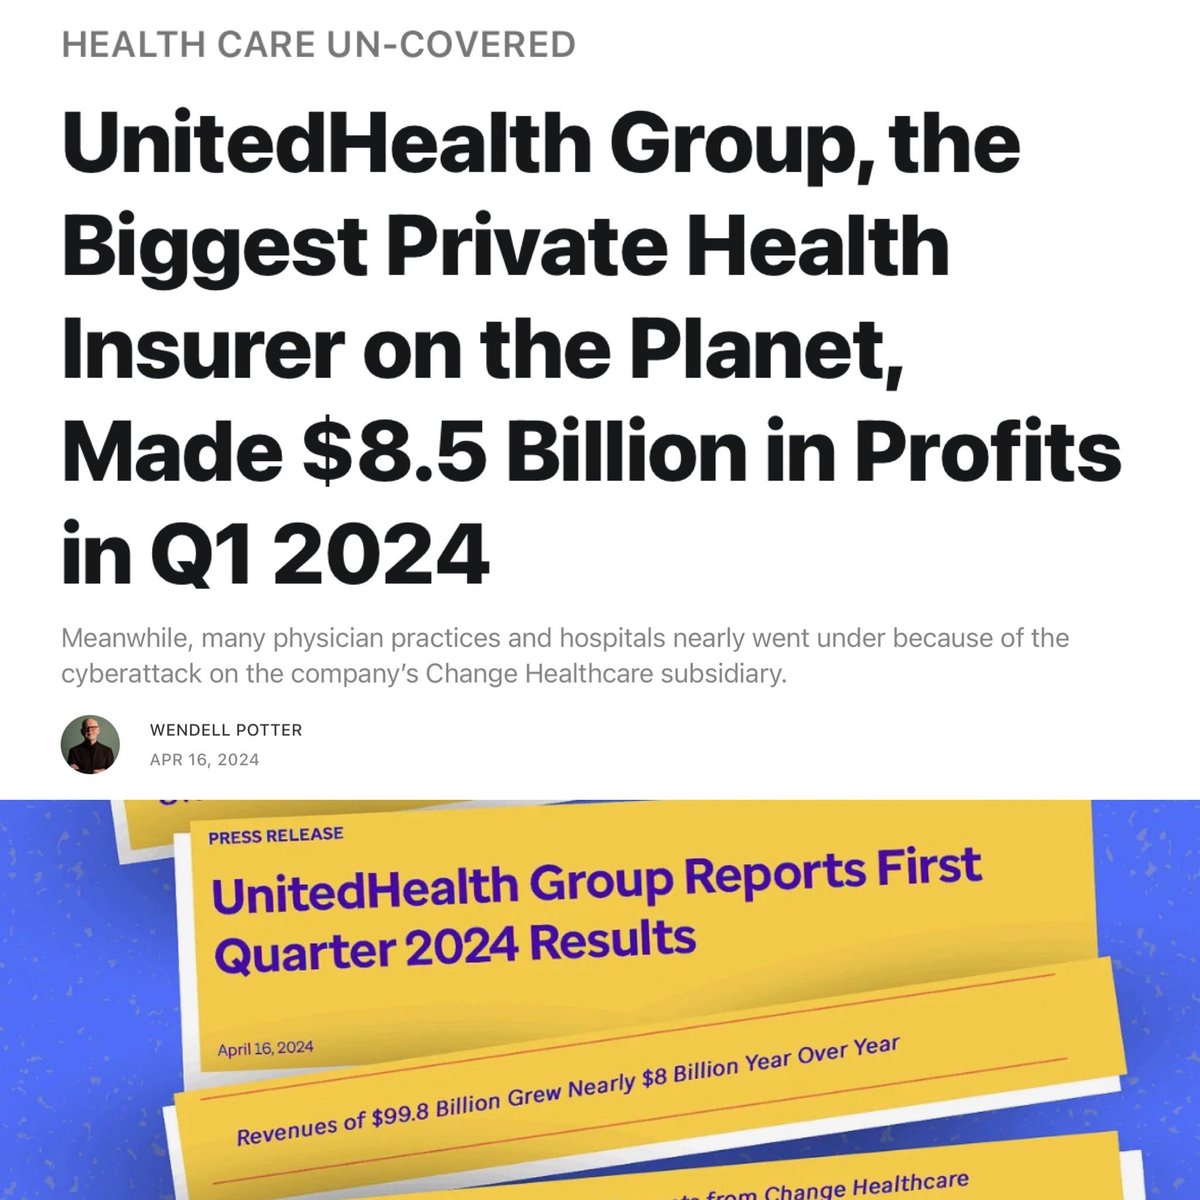 Your medical debt is the health insurance industry’s profit.